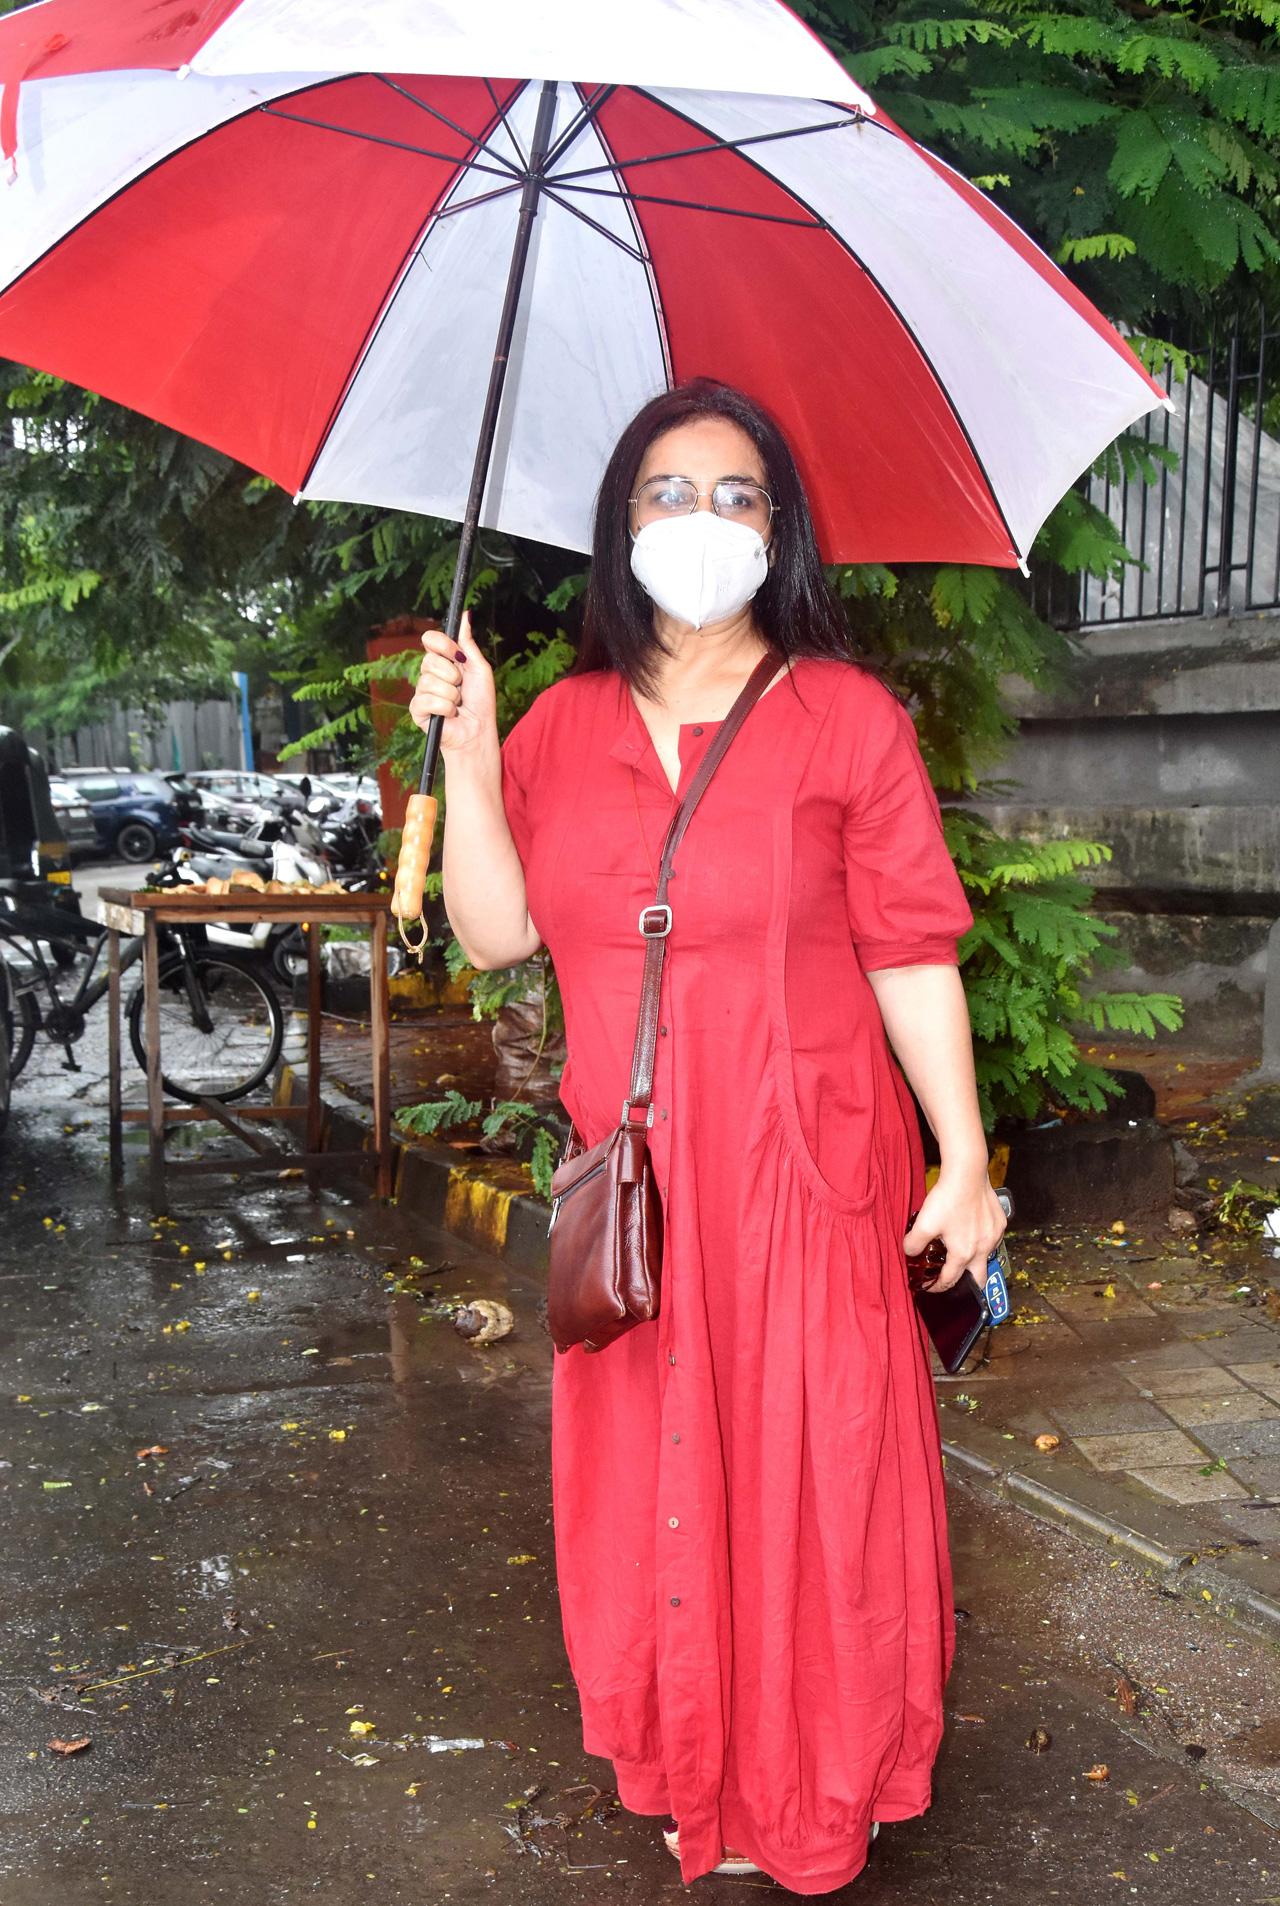 Divya Dutta too was spotted at the same salon in Juhu. The actress sported a red long dress as she arrived at the salon.